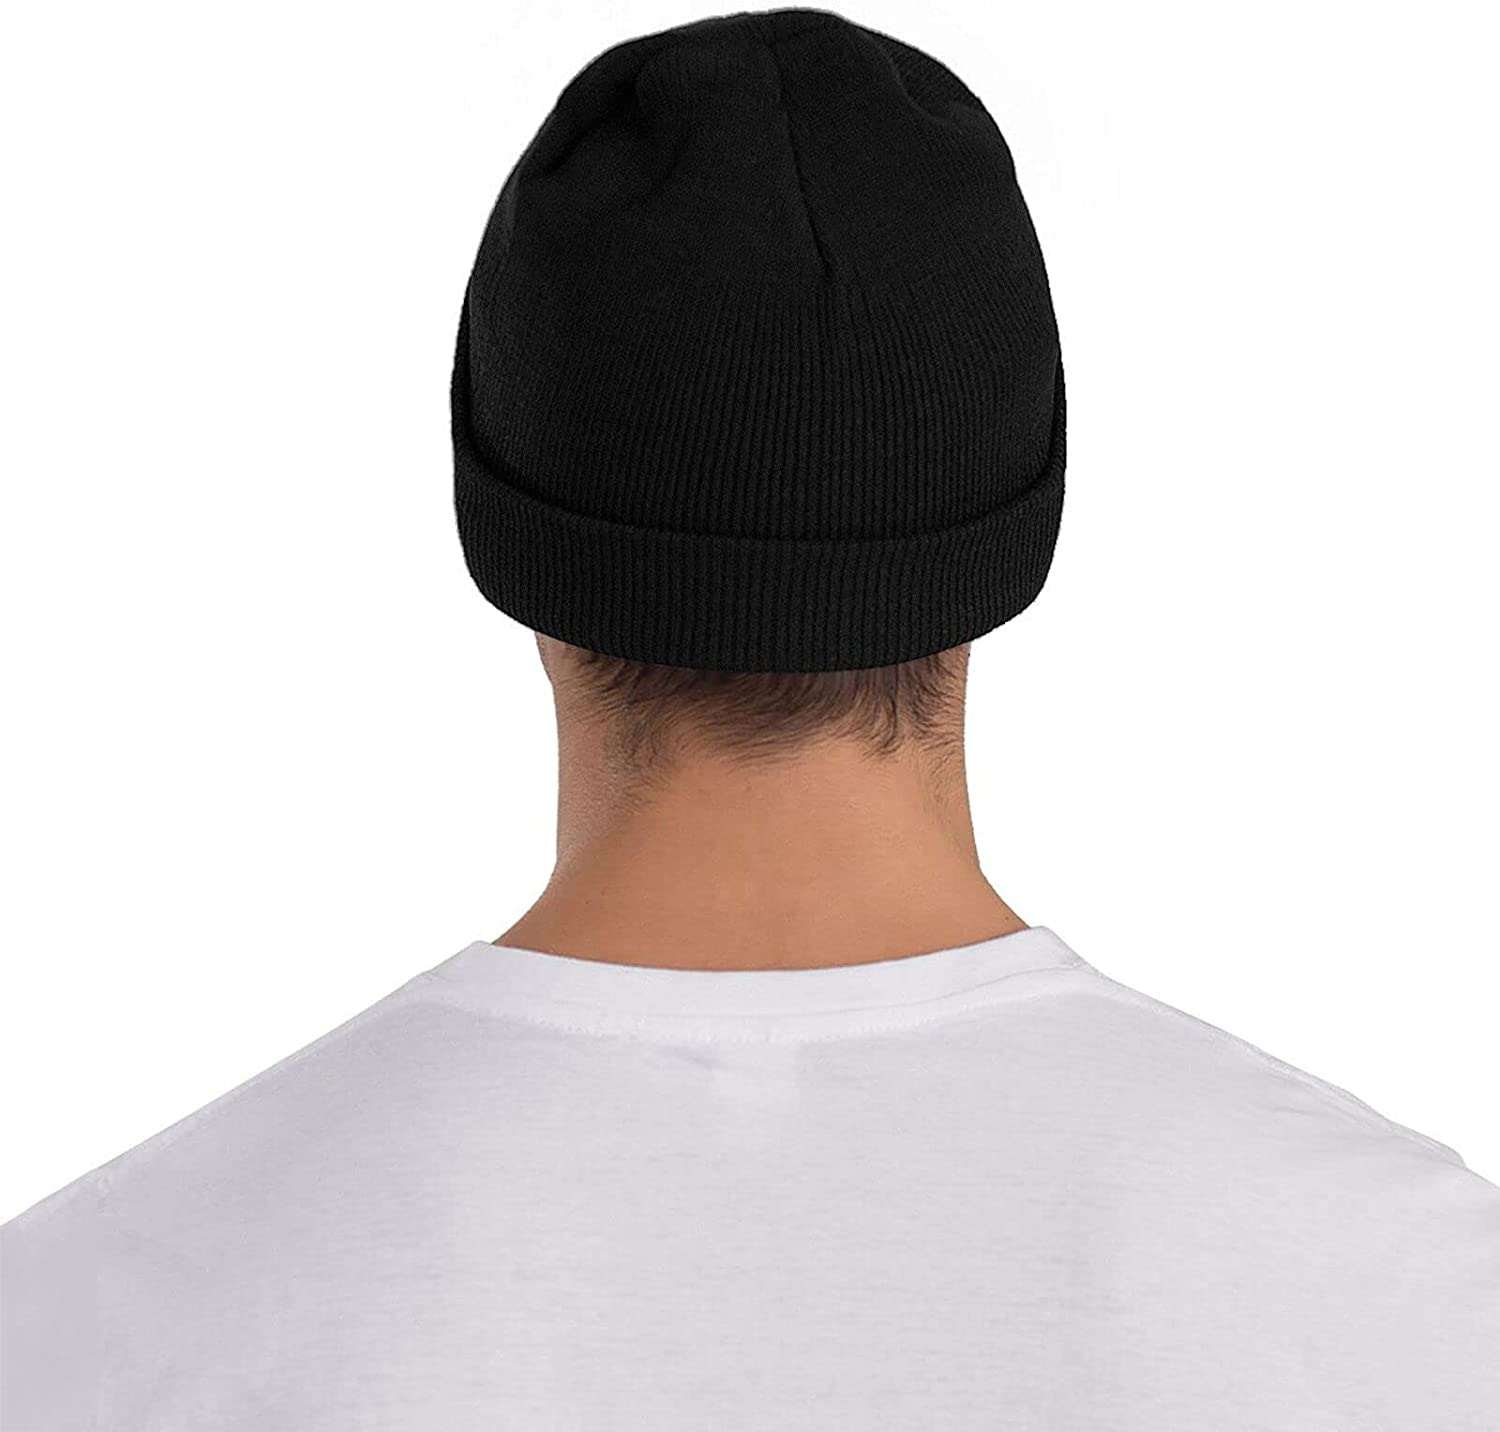 Warm for Soft Weather Toboggan Suicide Logo gogoherhome for Cold Hats Stretchy Boys Knit Embroidered Cap Beanie Black Men Women